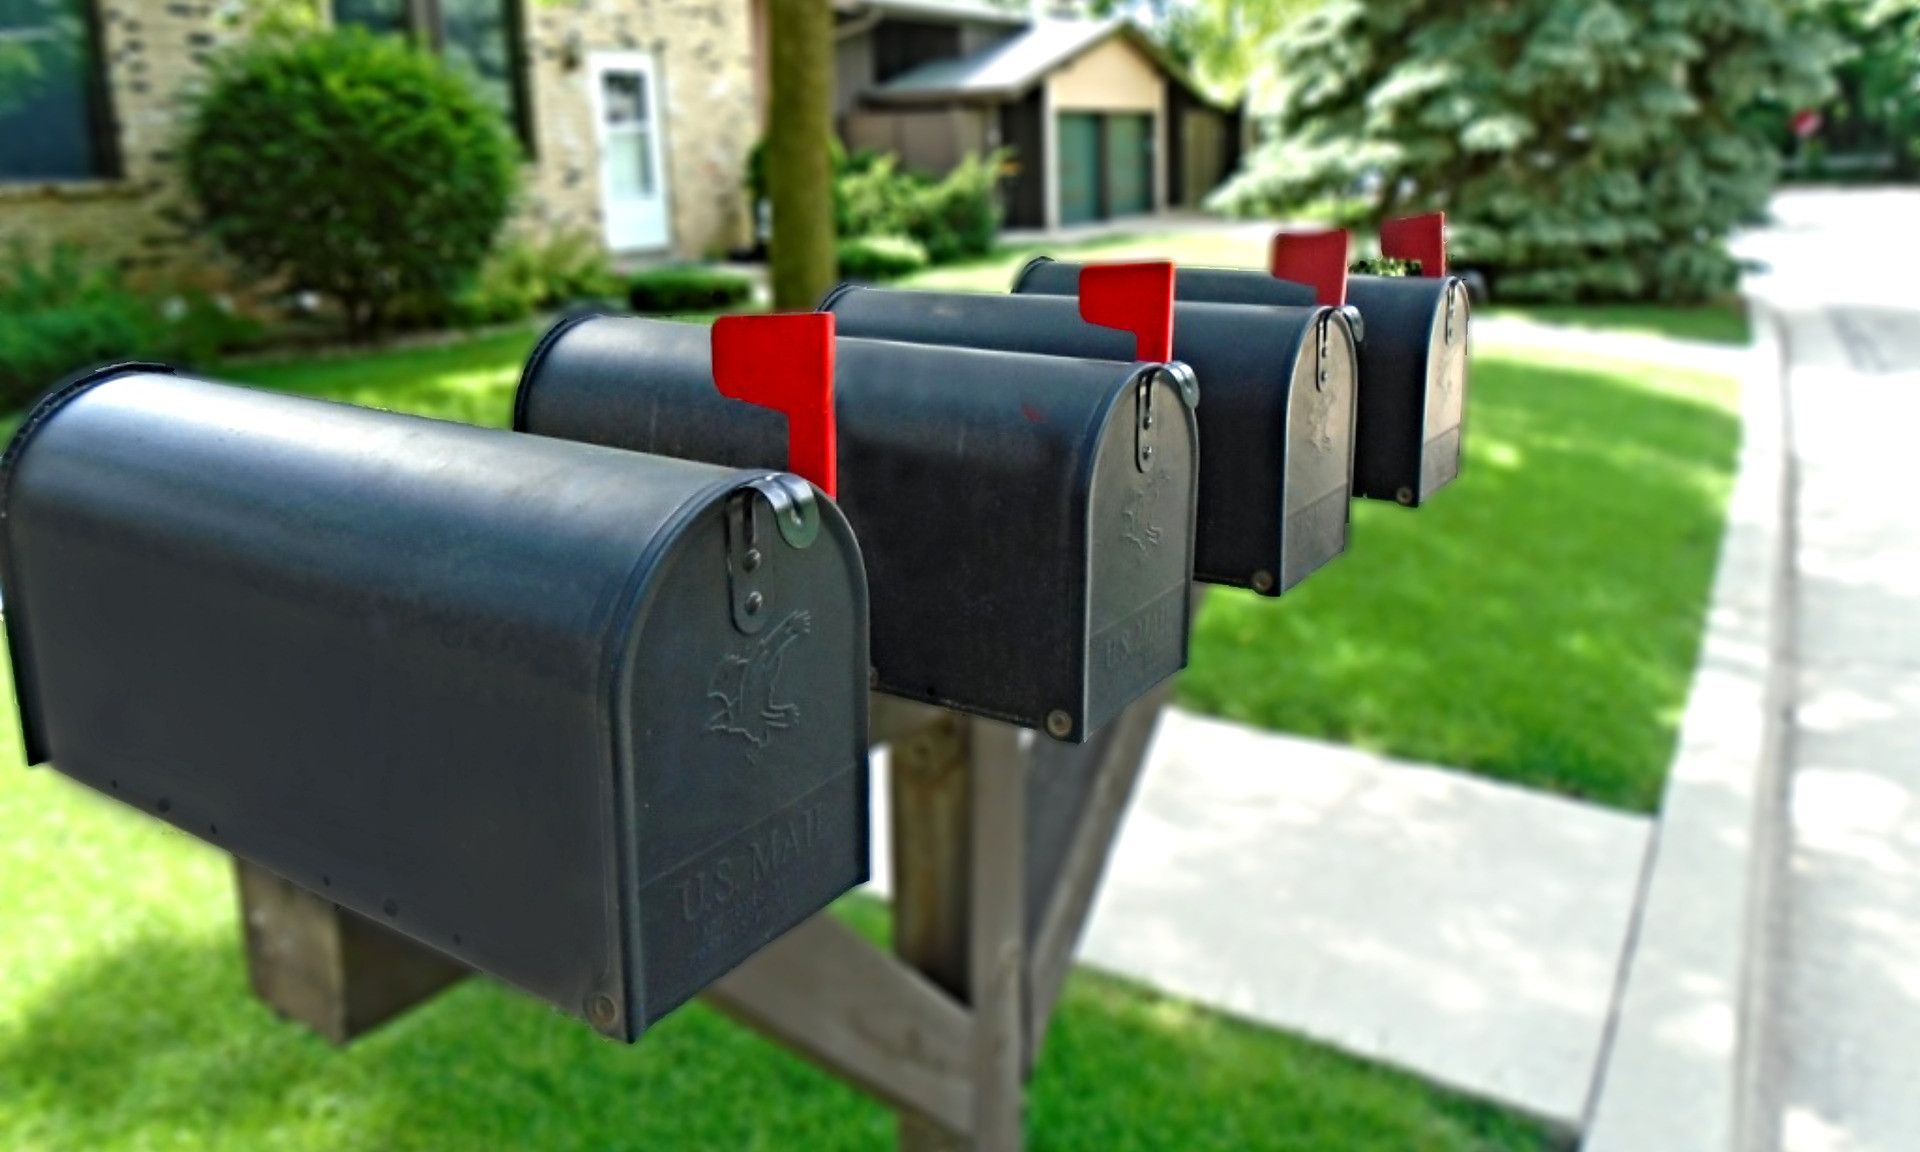 The USPS’s New Service will Change Mail Marketing – And it’s Free